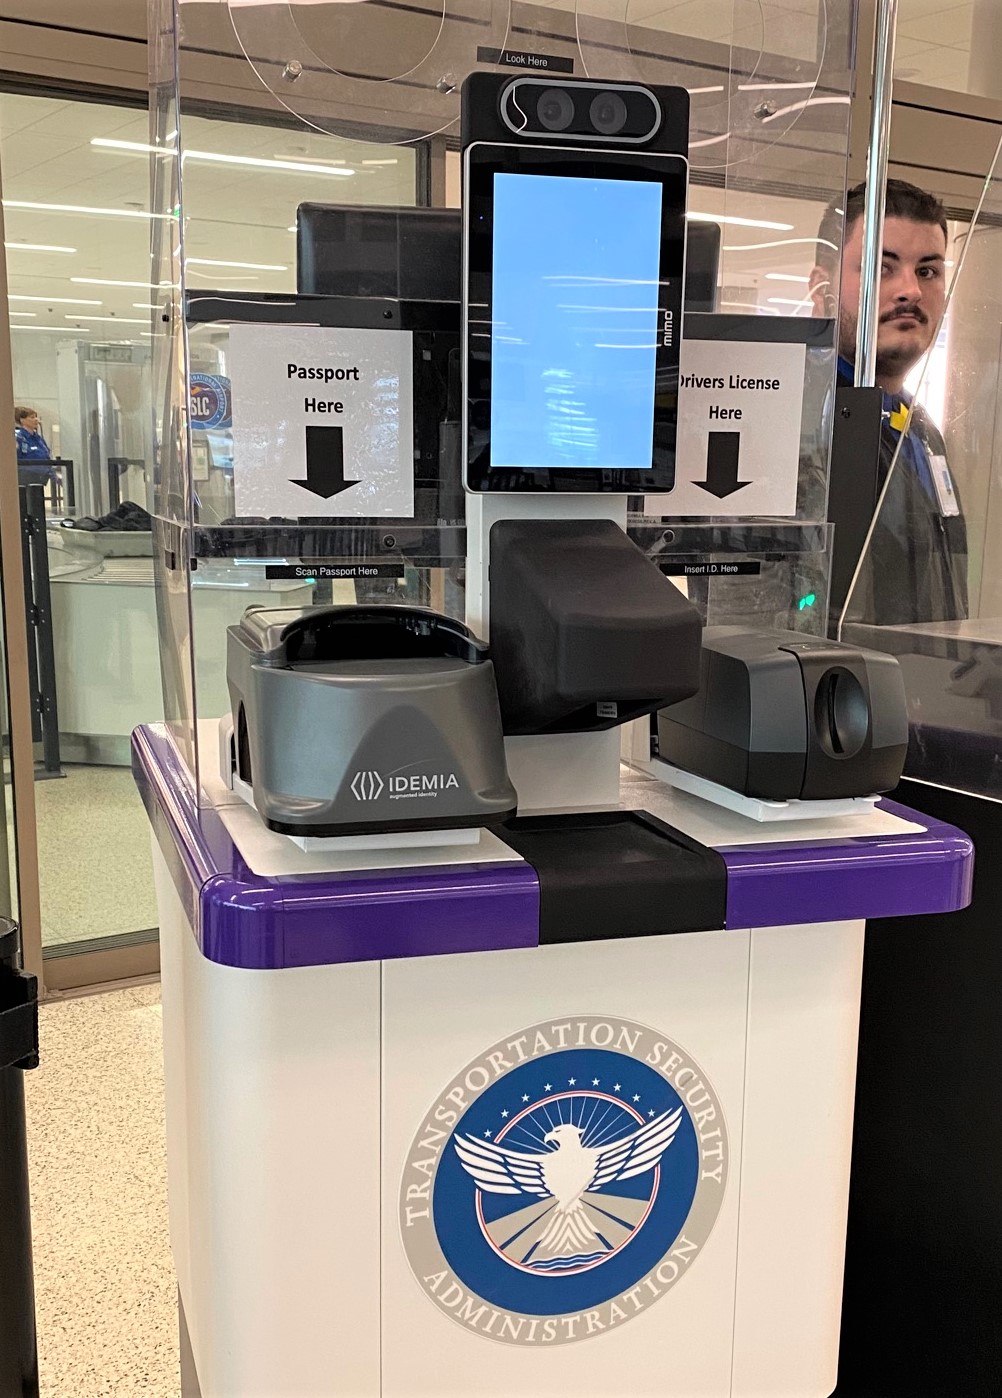 tsa-using-state-of-the-art-identity-verification-technology-accepting-mobile-driver-licenses-at